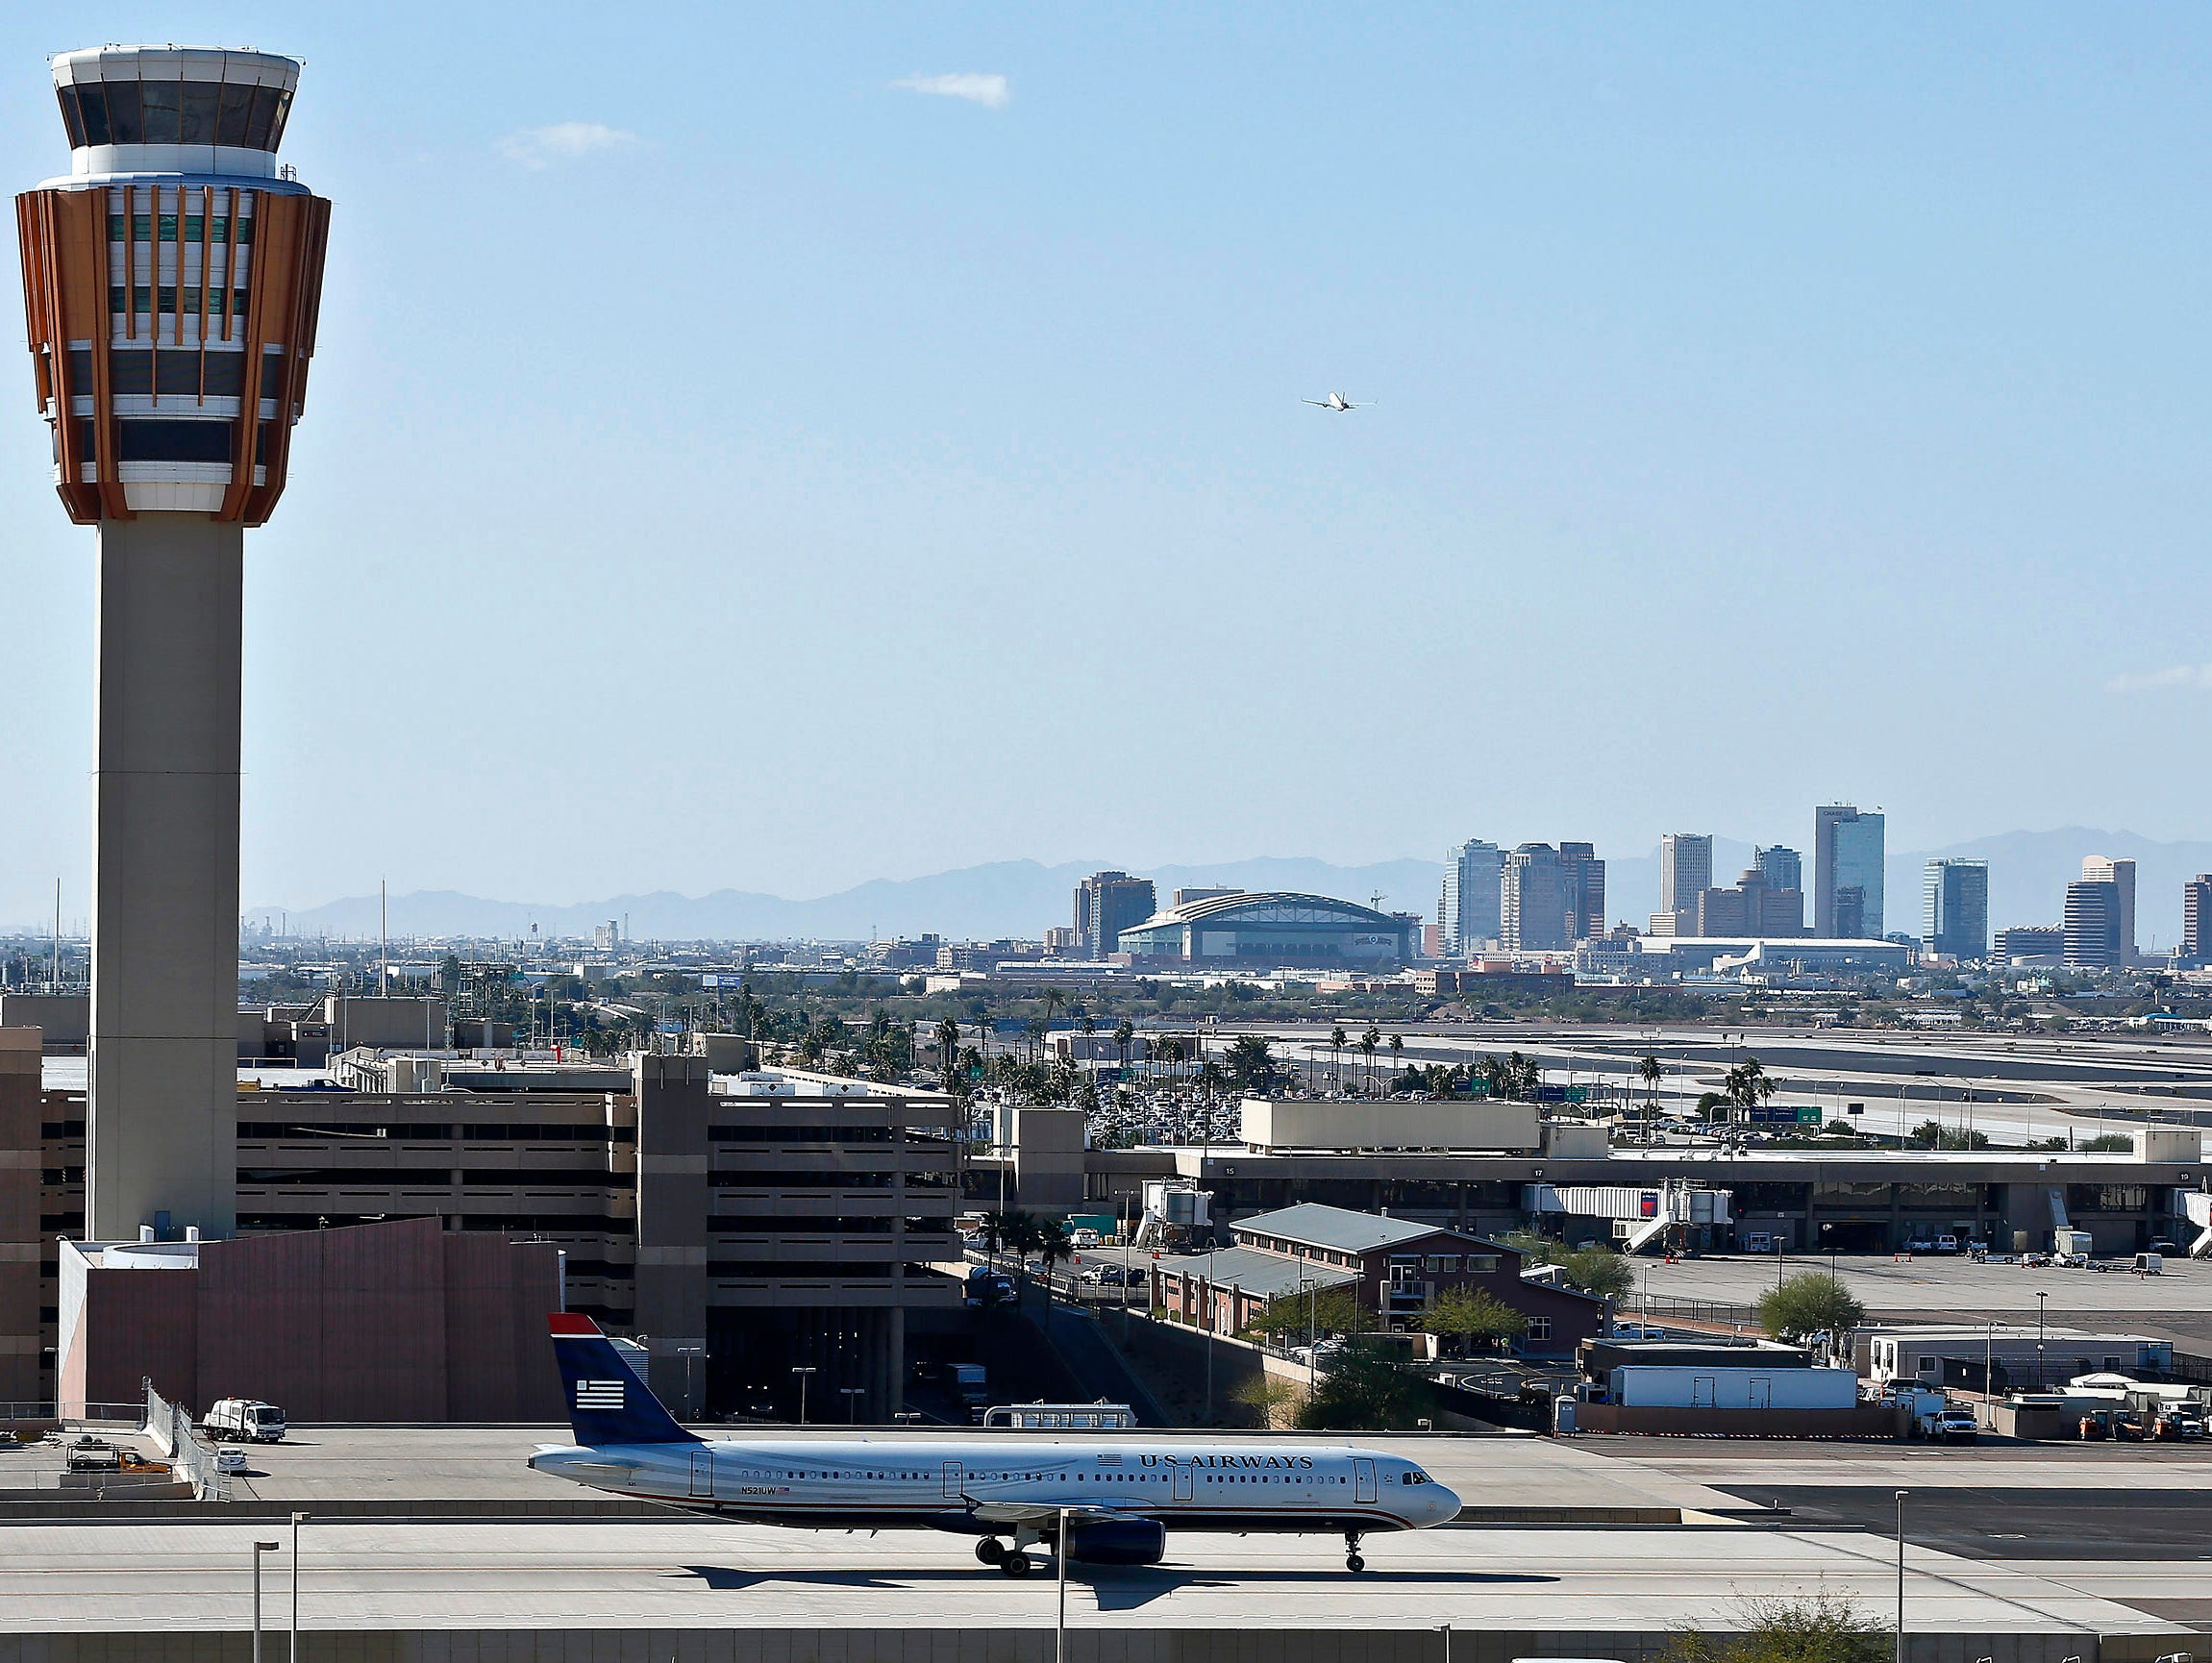 An unprecedented slate of big-time sporting events, culminating in Super Bowl XLIX, will likely shatter passenger records at  Phoenix Sky Harbor airport.